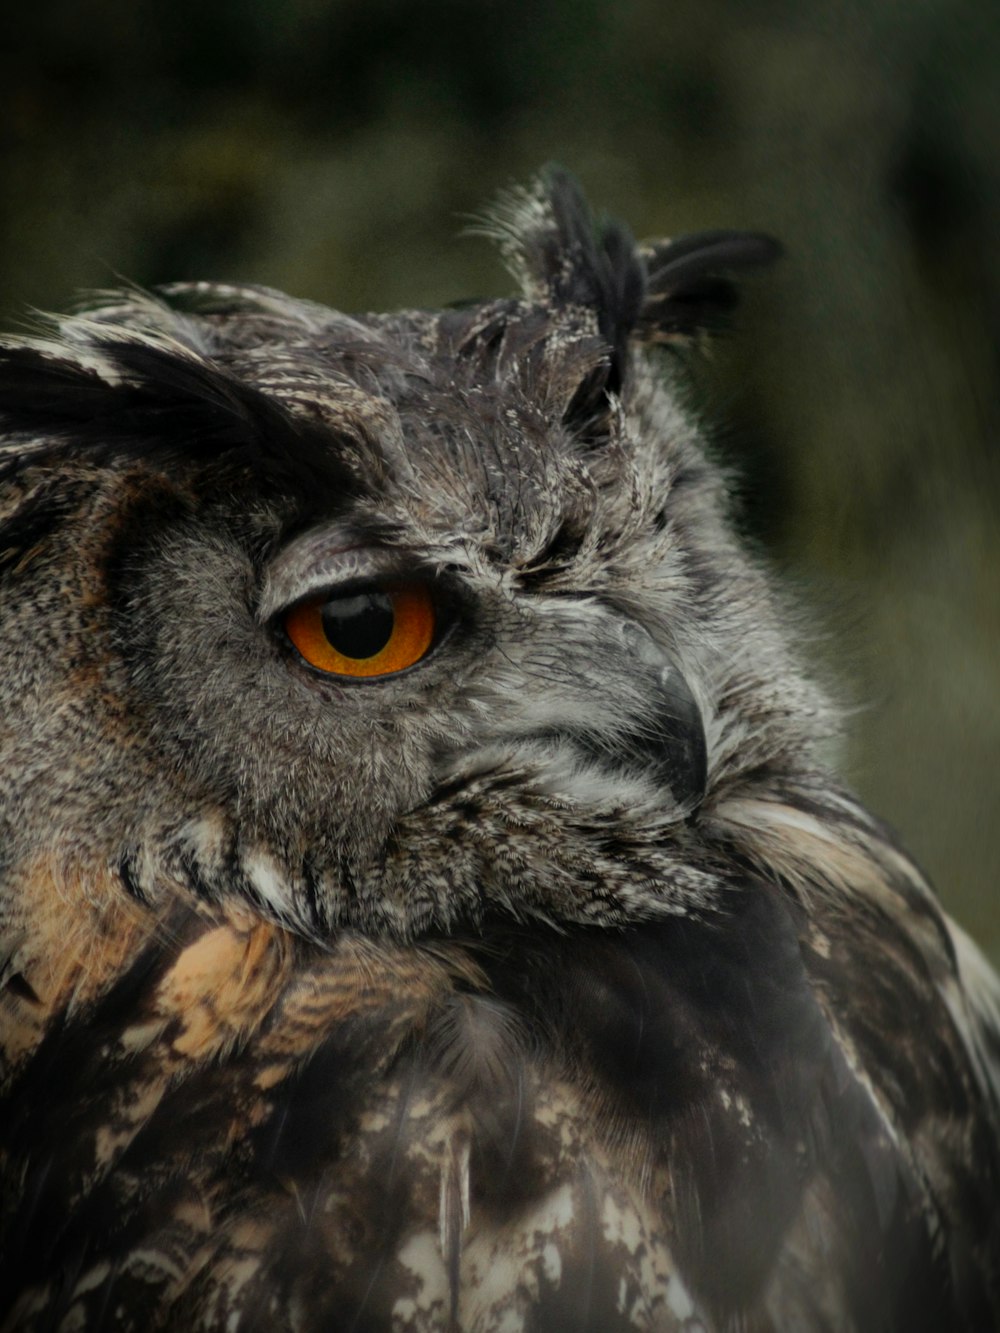 a close up of an owl's face with a blurry background